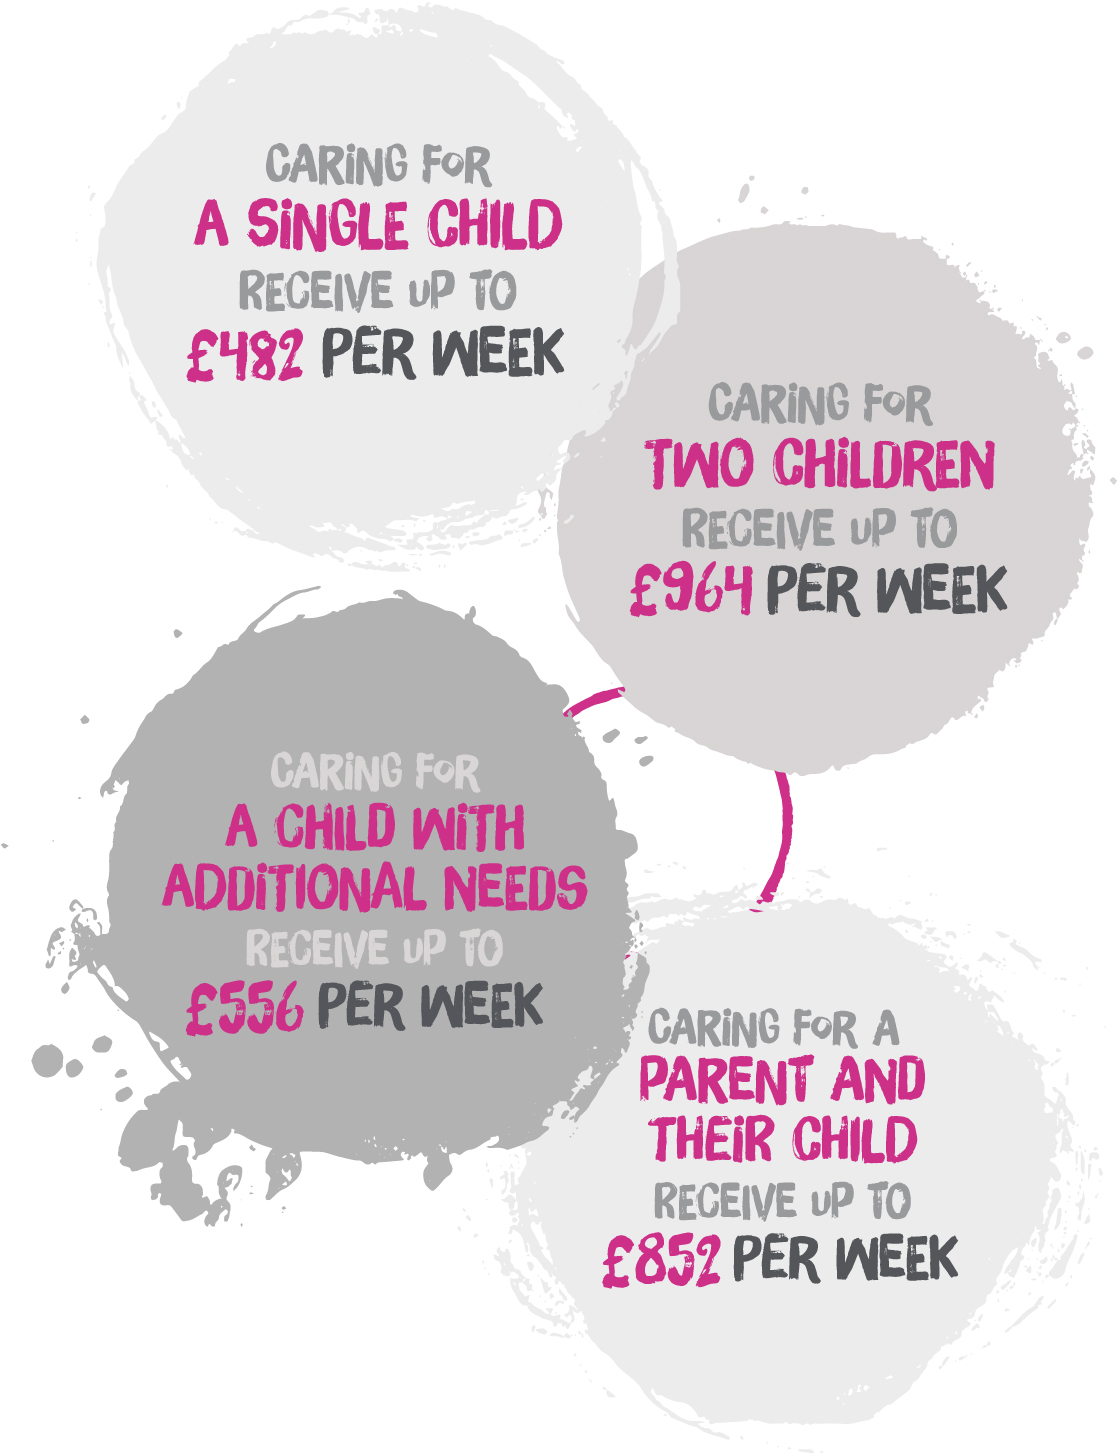 These are examples of our Doncaster fostering allowance